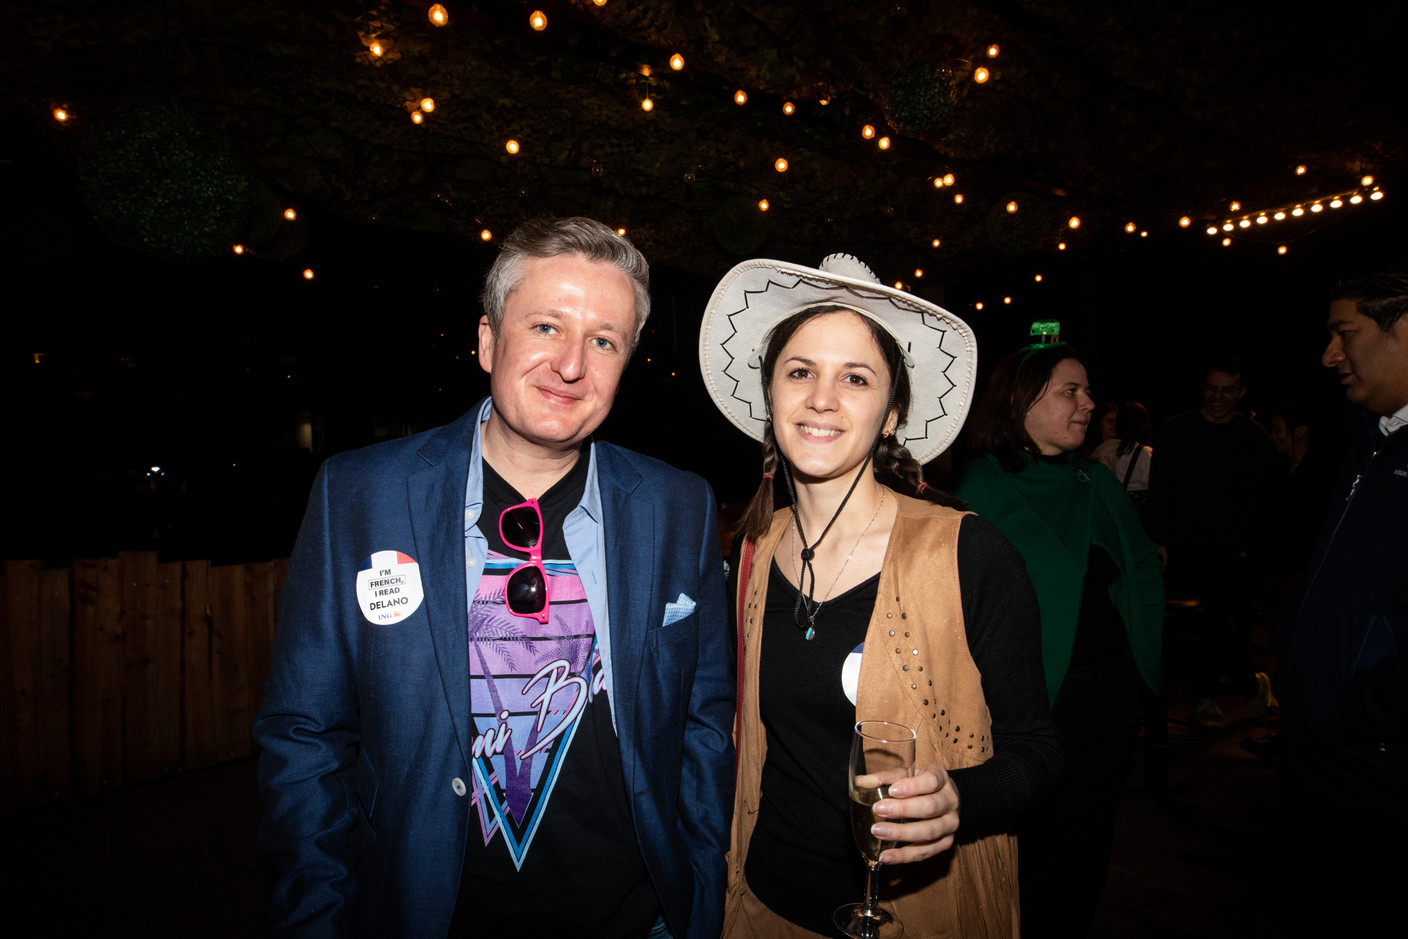 Denis Lecanu (Betic) and Jessica Gaspar (Betic), seen at Delano’s 12th anniversary party, 23 February 2023. Photo: Eva Krins/Maison Moderne